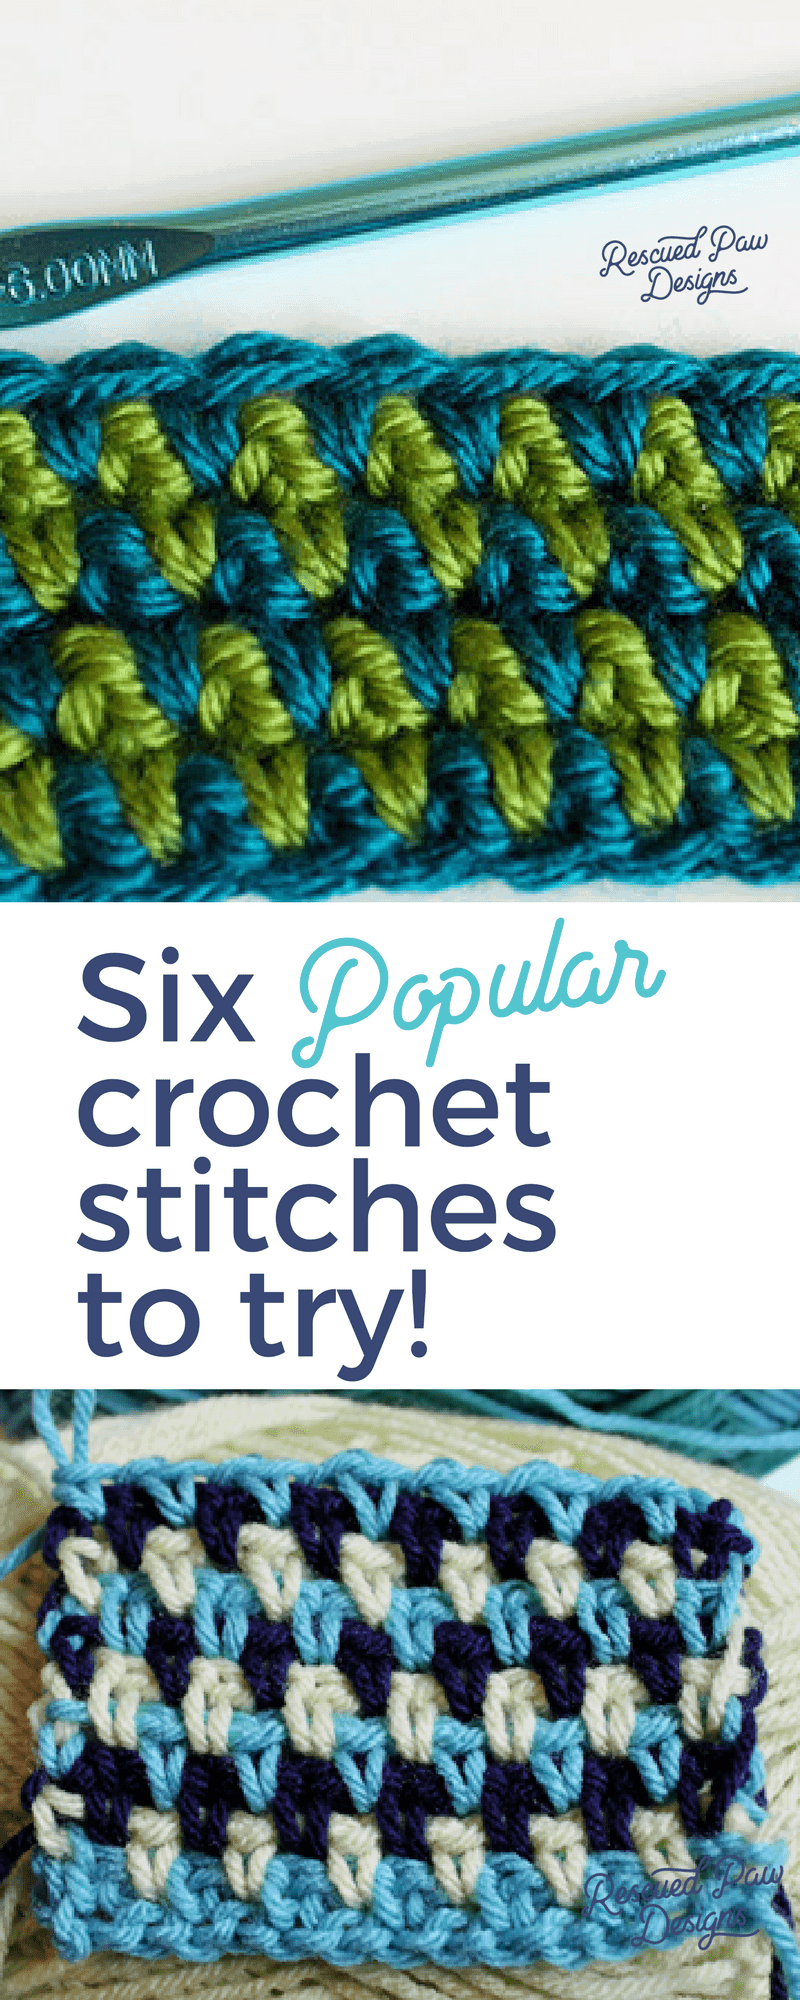 6 Easy Crochet Stitches to Learn Today - Different Stitches for Crochet